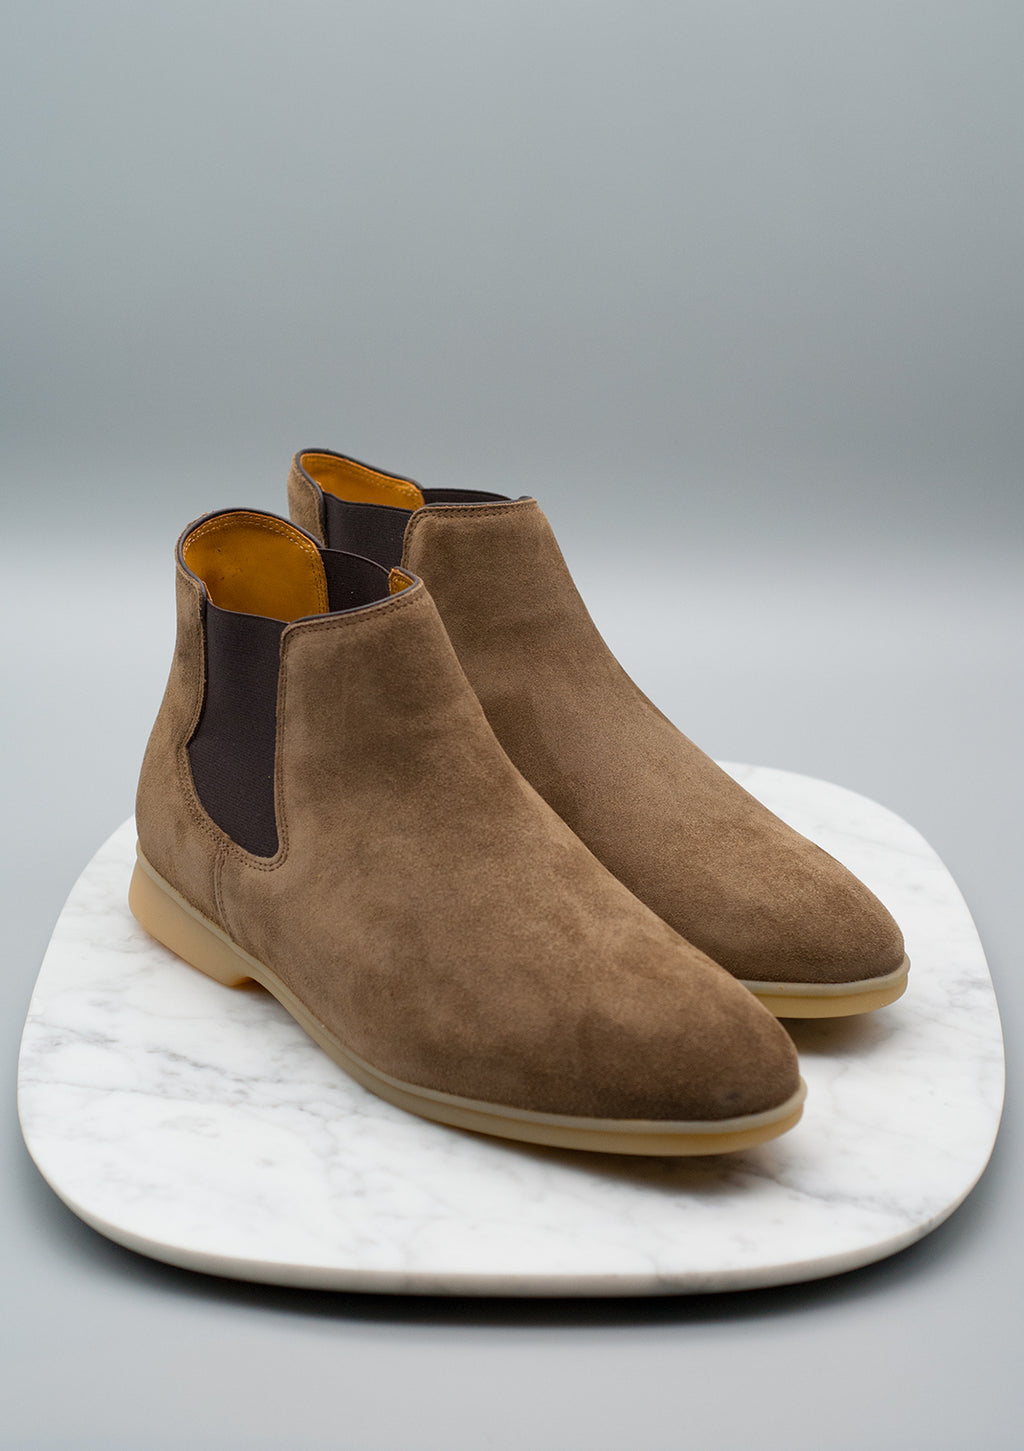 Baudoin & Rover Boots - Geige Suede Taupe Sole – Dashing Chicago